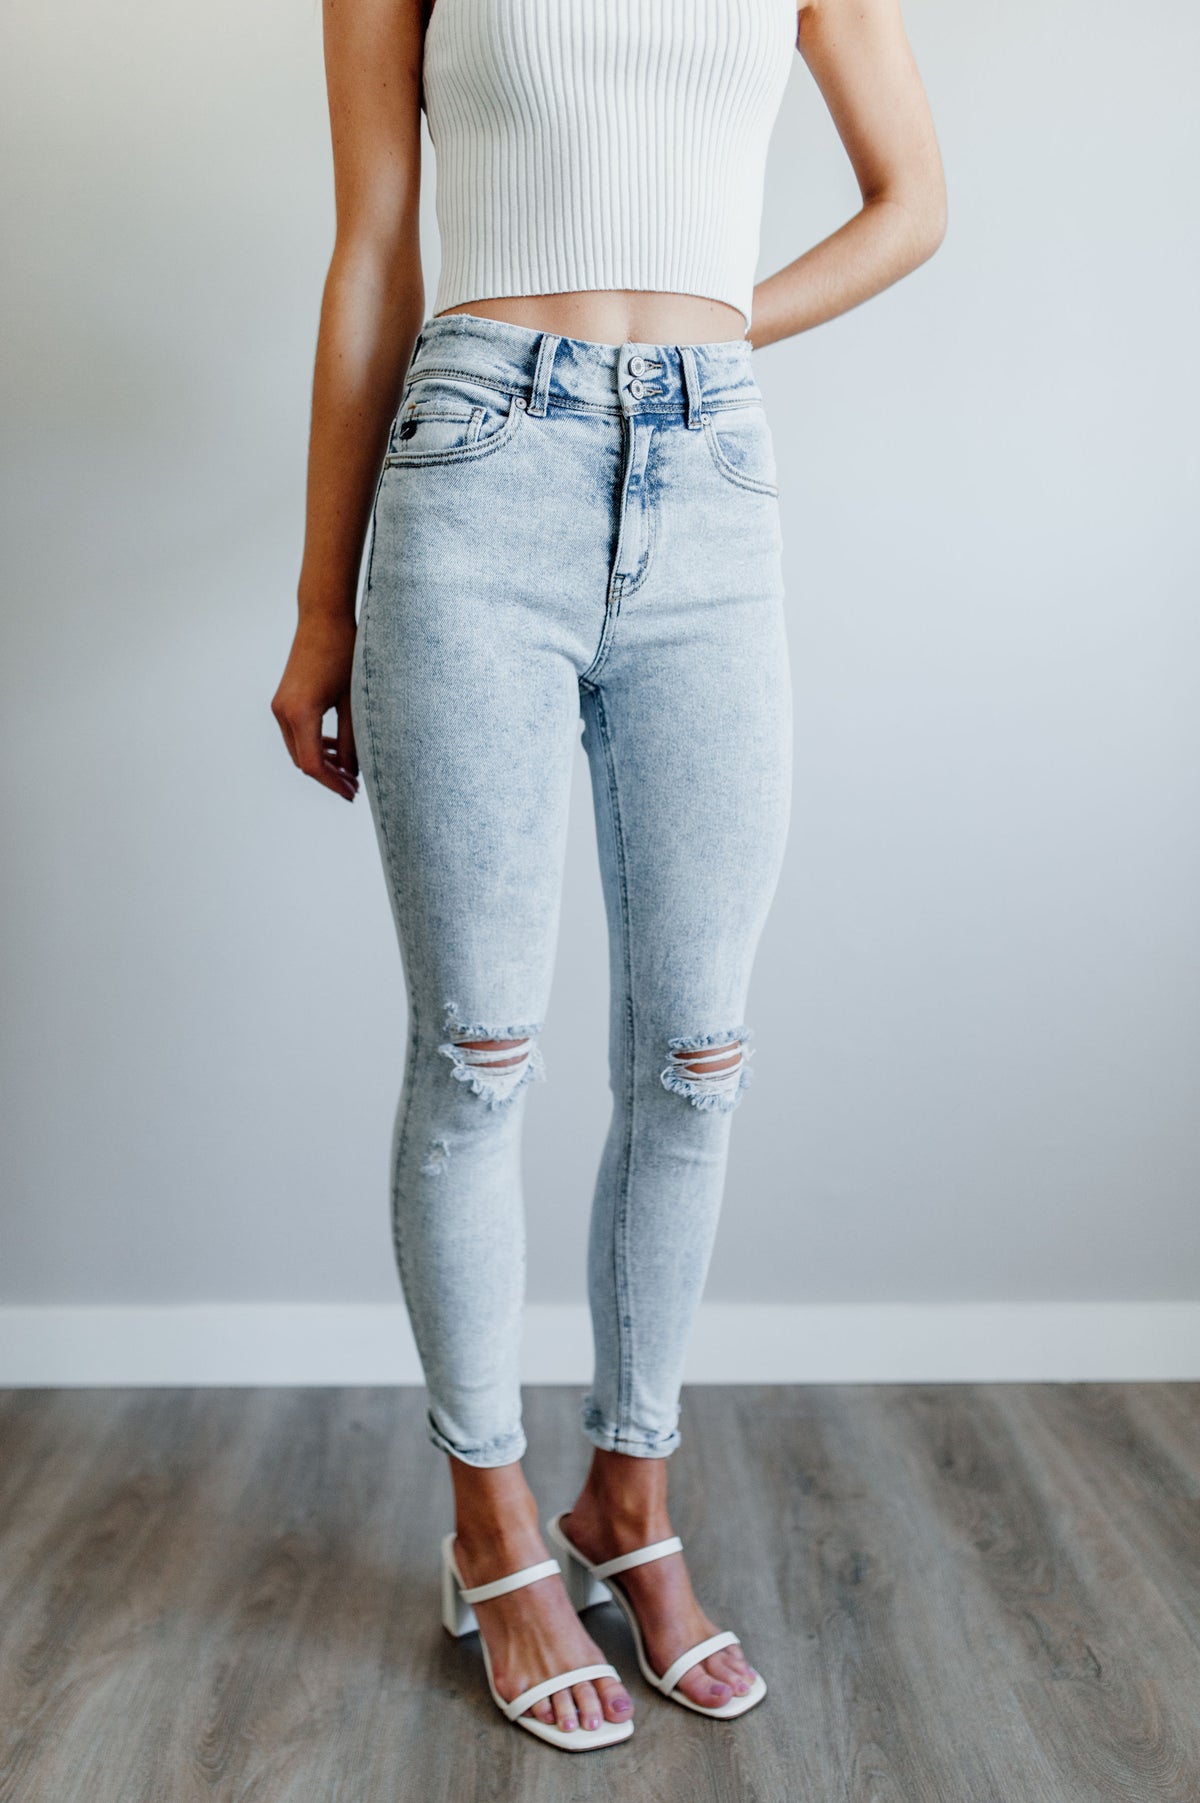 Pictured is a trendy high rise, denim jean with updated acid-wash material, light distressing, and cropped ankle.